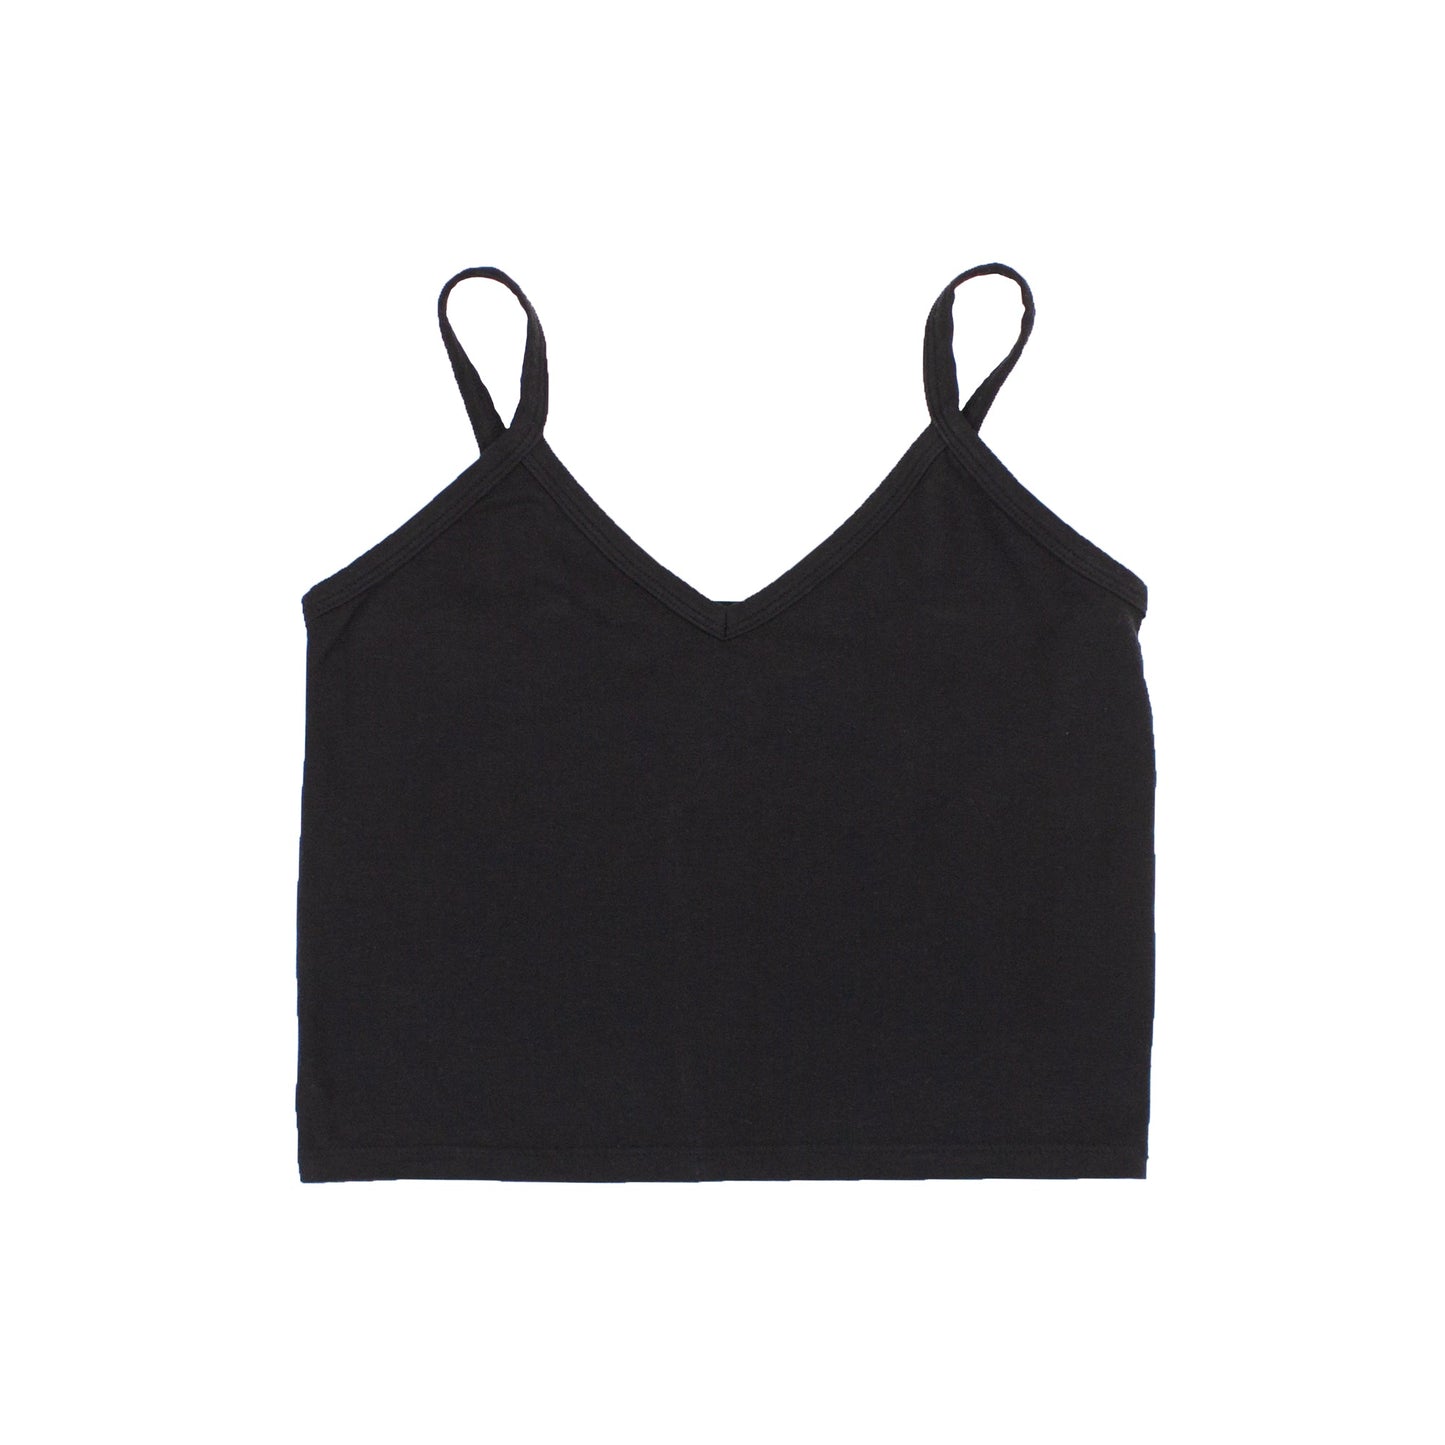 Hemp and organic cotton tank top by Jungmaven; A fitted and flattering silhouette that never goes out of style. Made from a super soft hemp blend with the perfect amount of stretch. Layer or wear on its own.